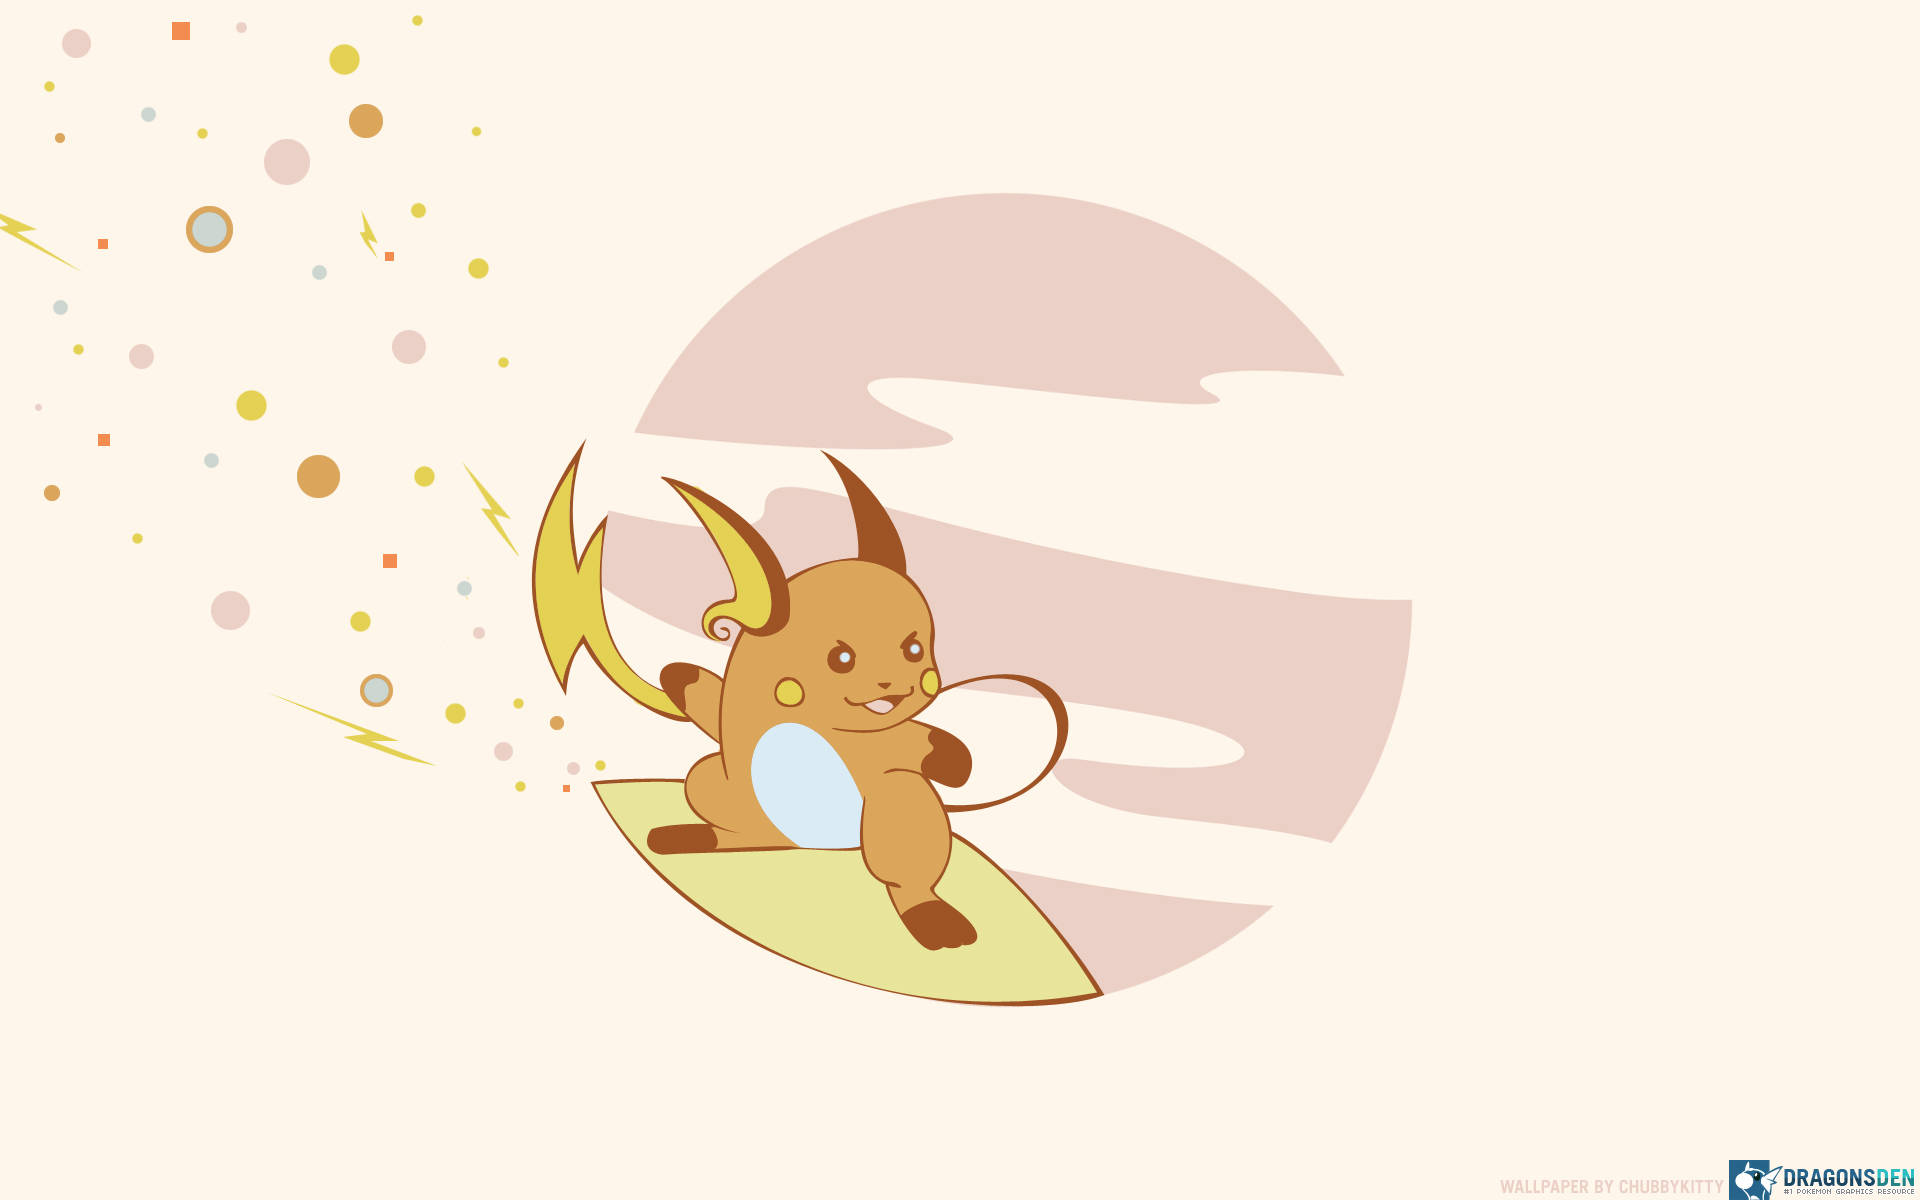 Ride The Surfing Wave With Raichu!